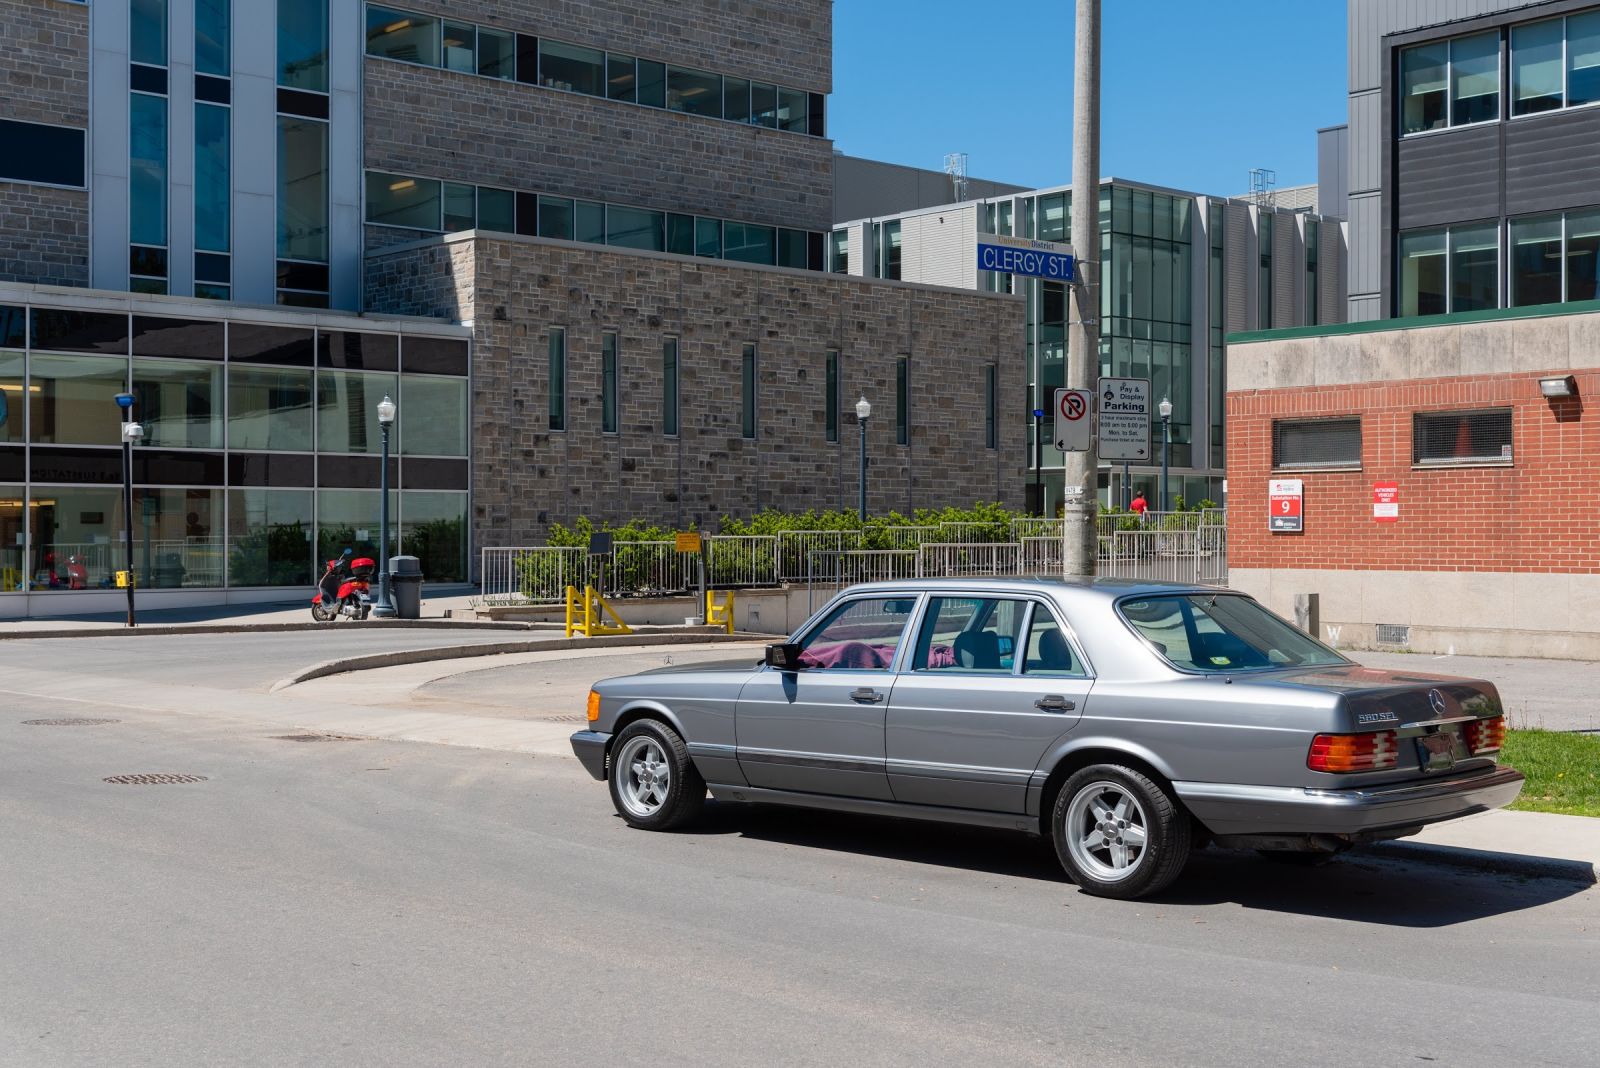 Illustration for article titled New Career, New Camera, New City: June 2019 Carspotting in Kingston, ON